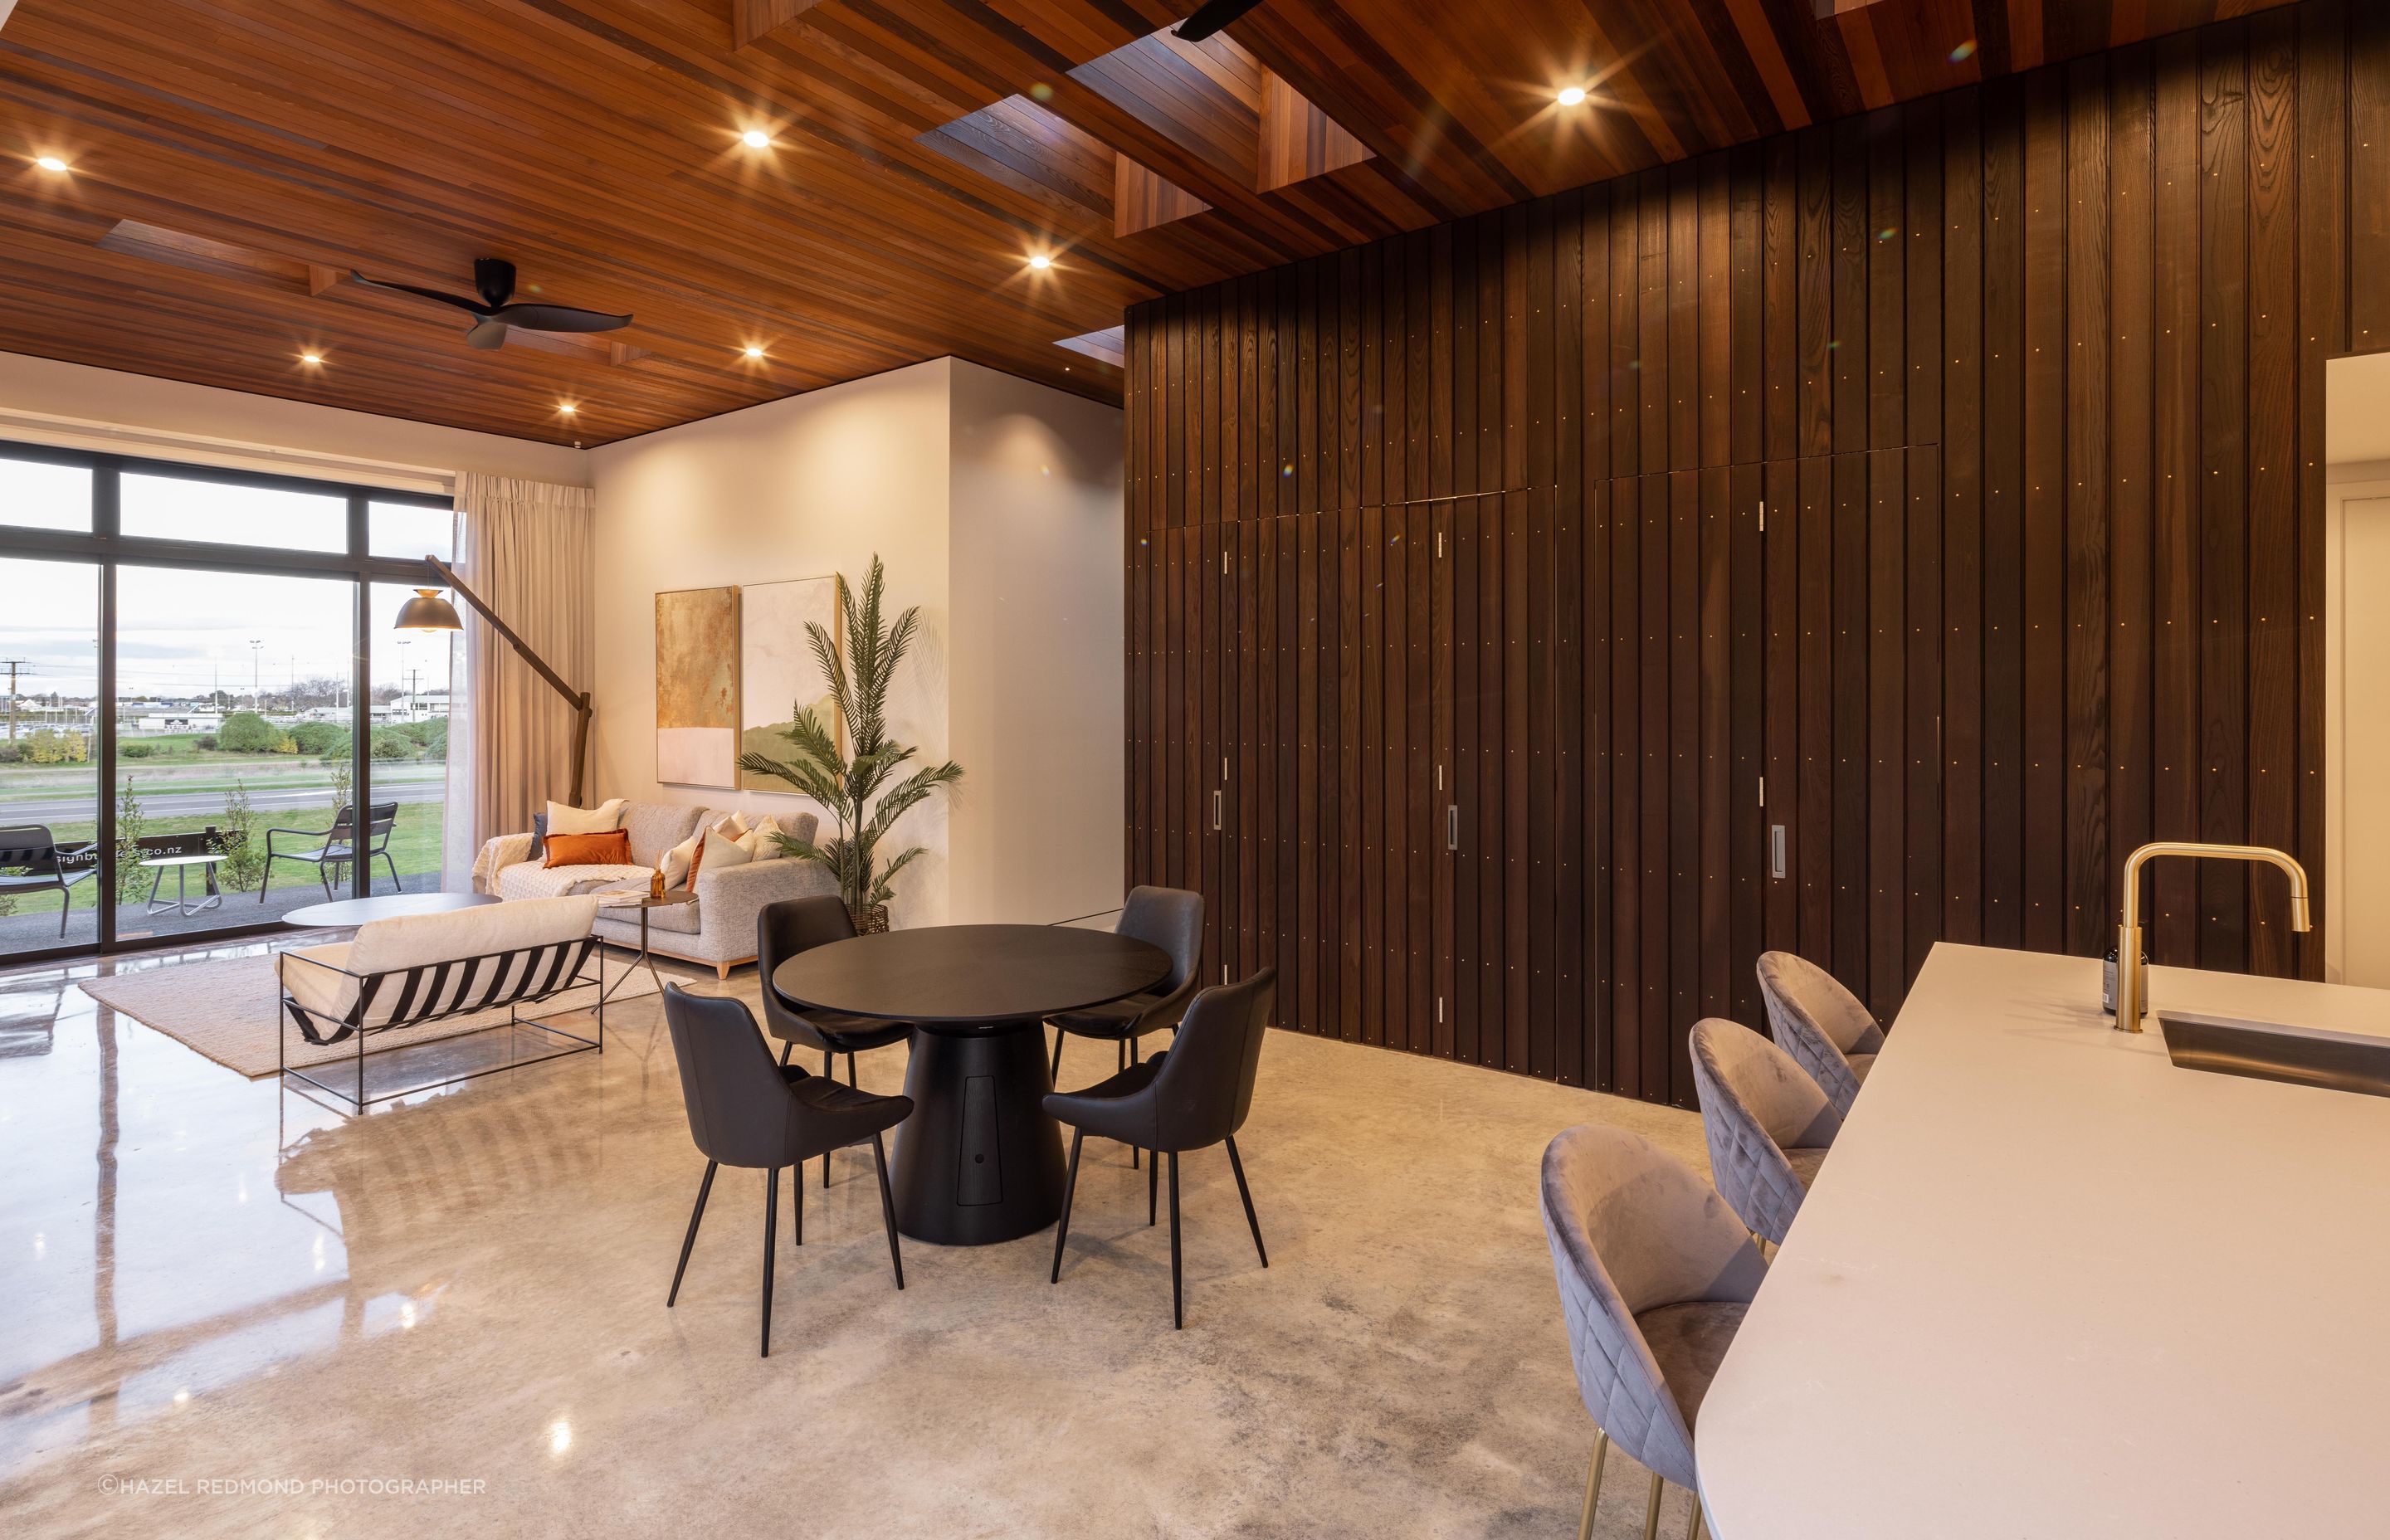 Thermory Ash vertical shiplap is ideal for an interior cladding because it doesn't contain any chemicals. This project was built by Design Builders, Hawke's Bay. Image credit: Hazel Redmond.